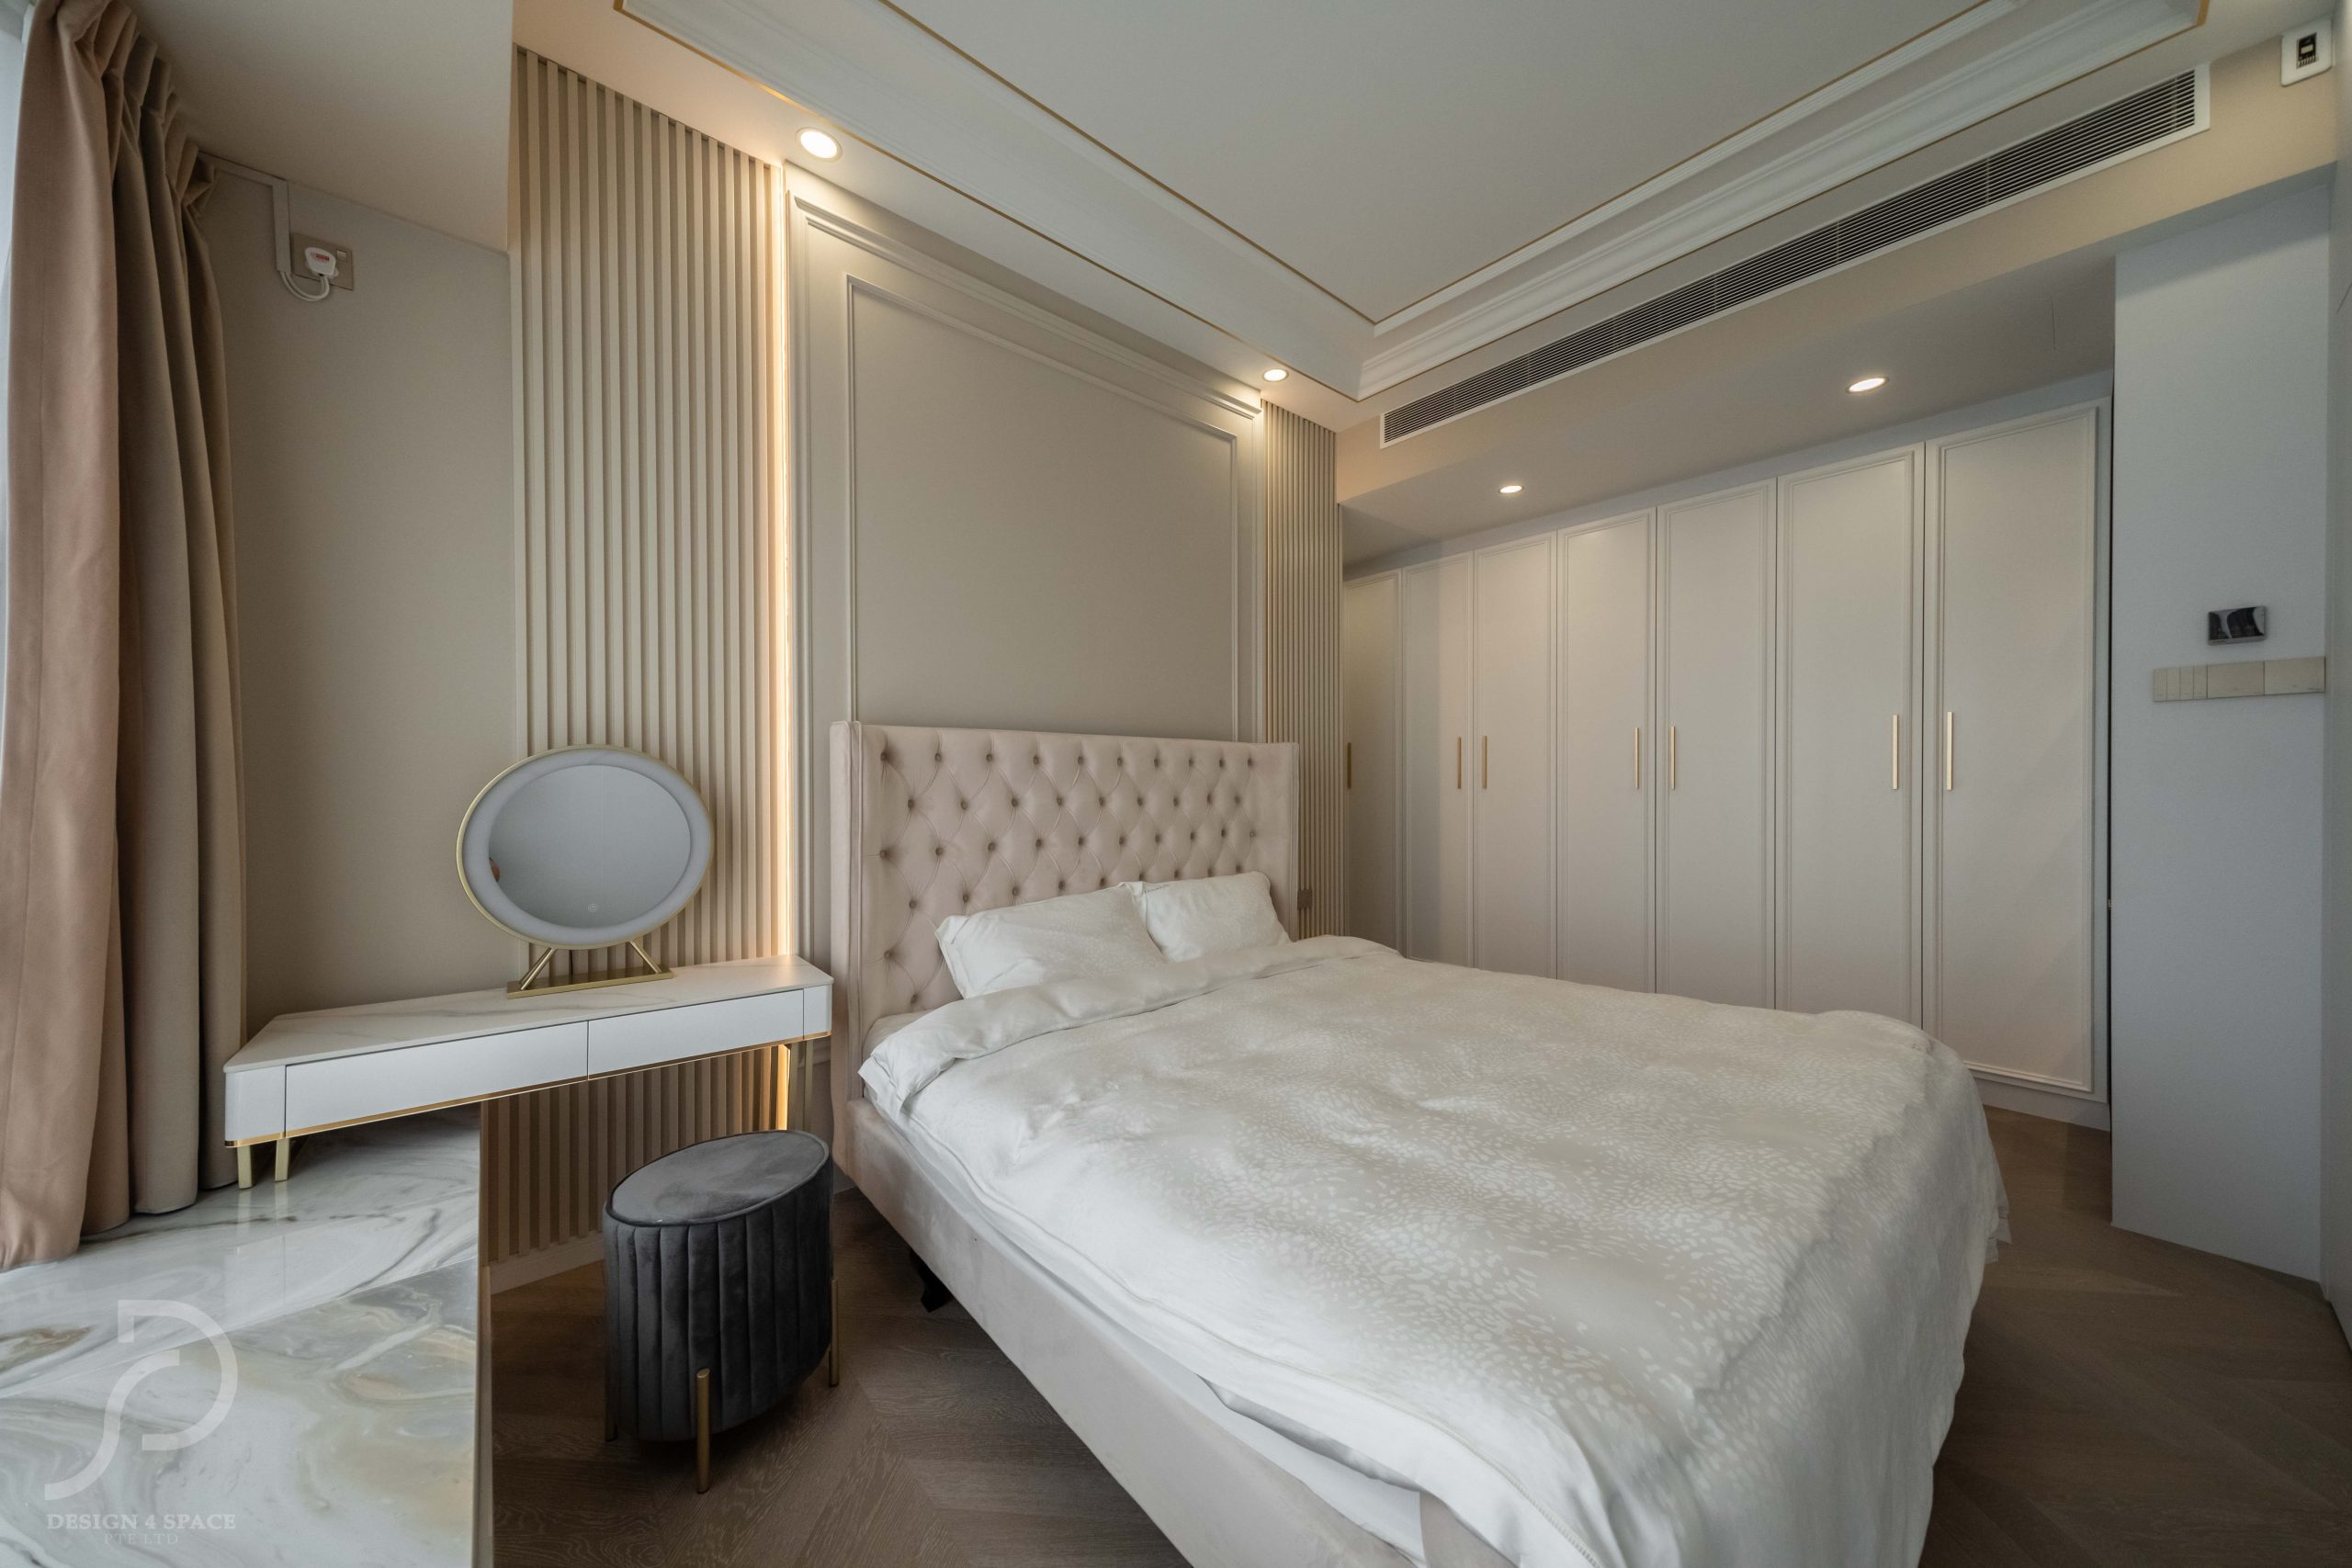 419 - paterson suites - jianwen - tpy - watermark50